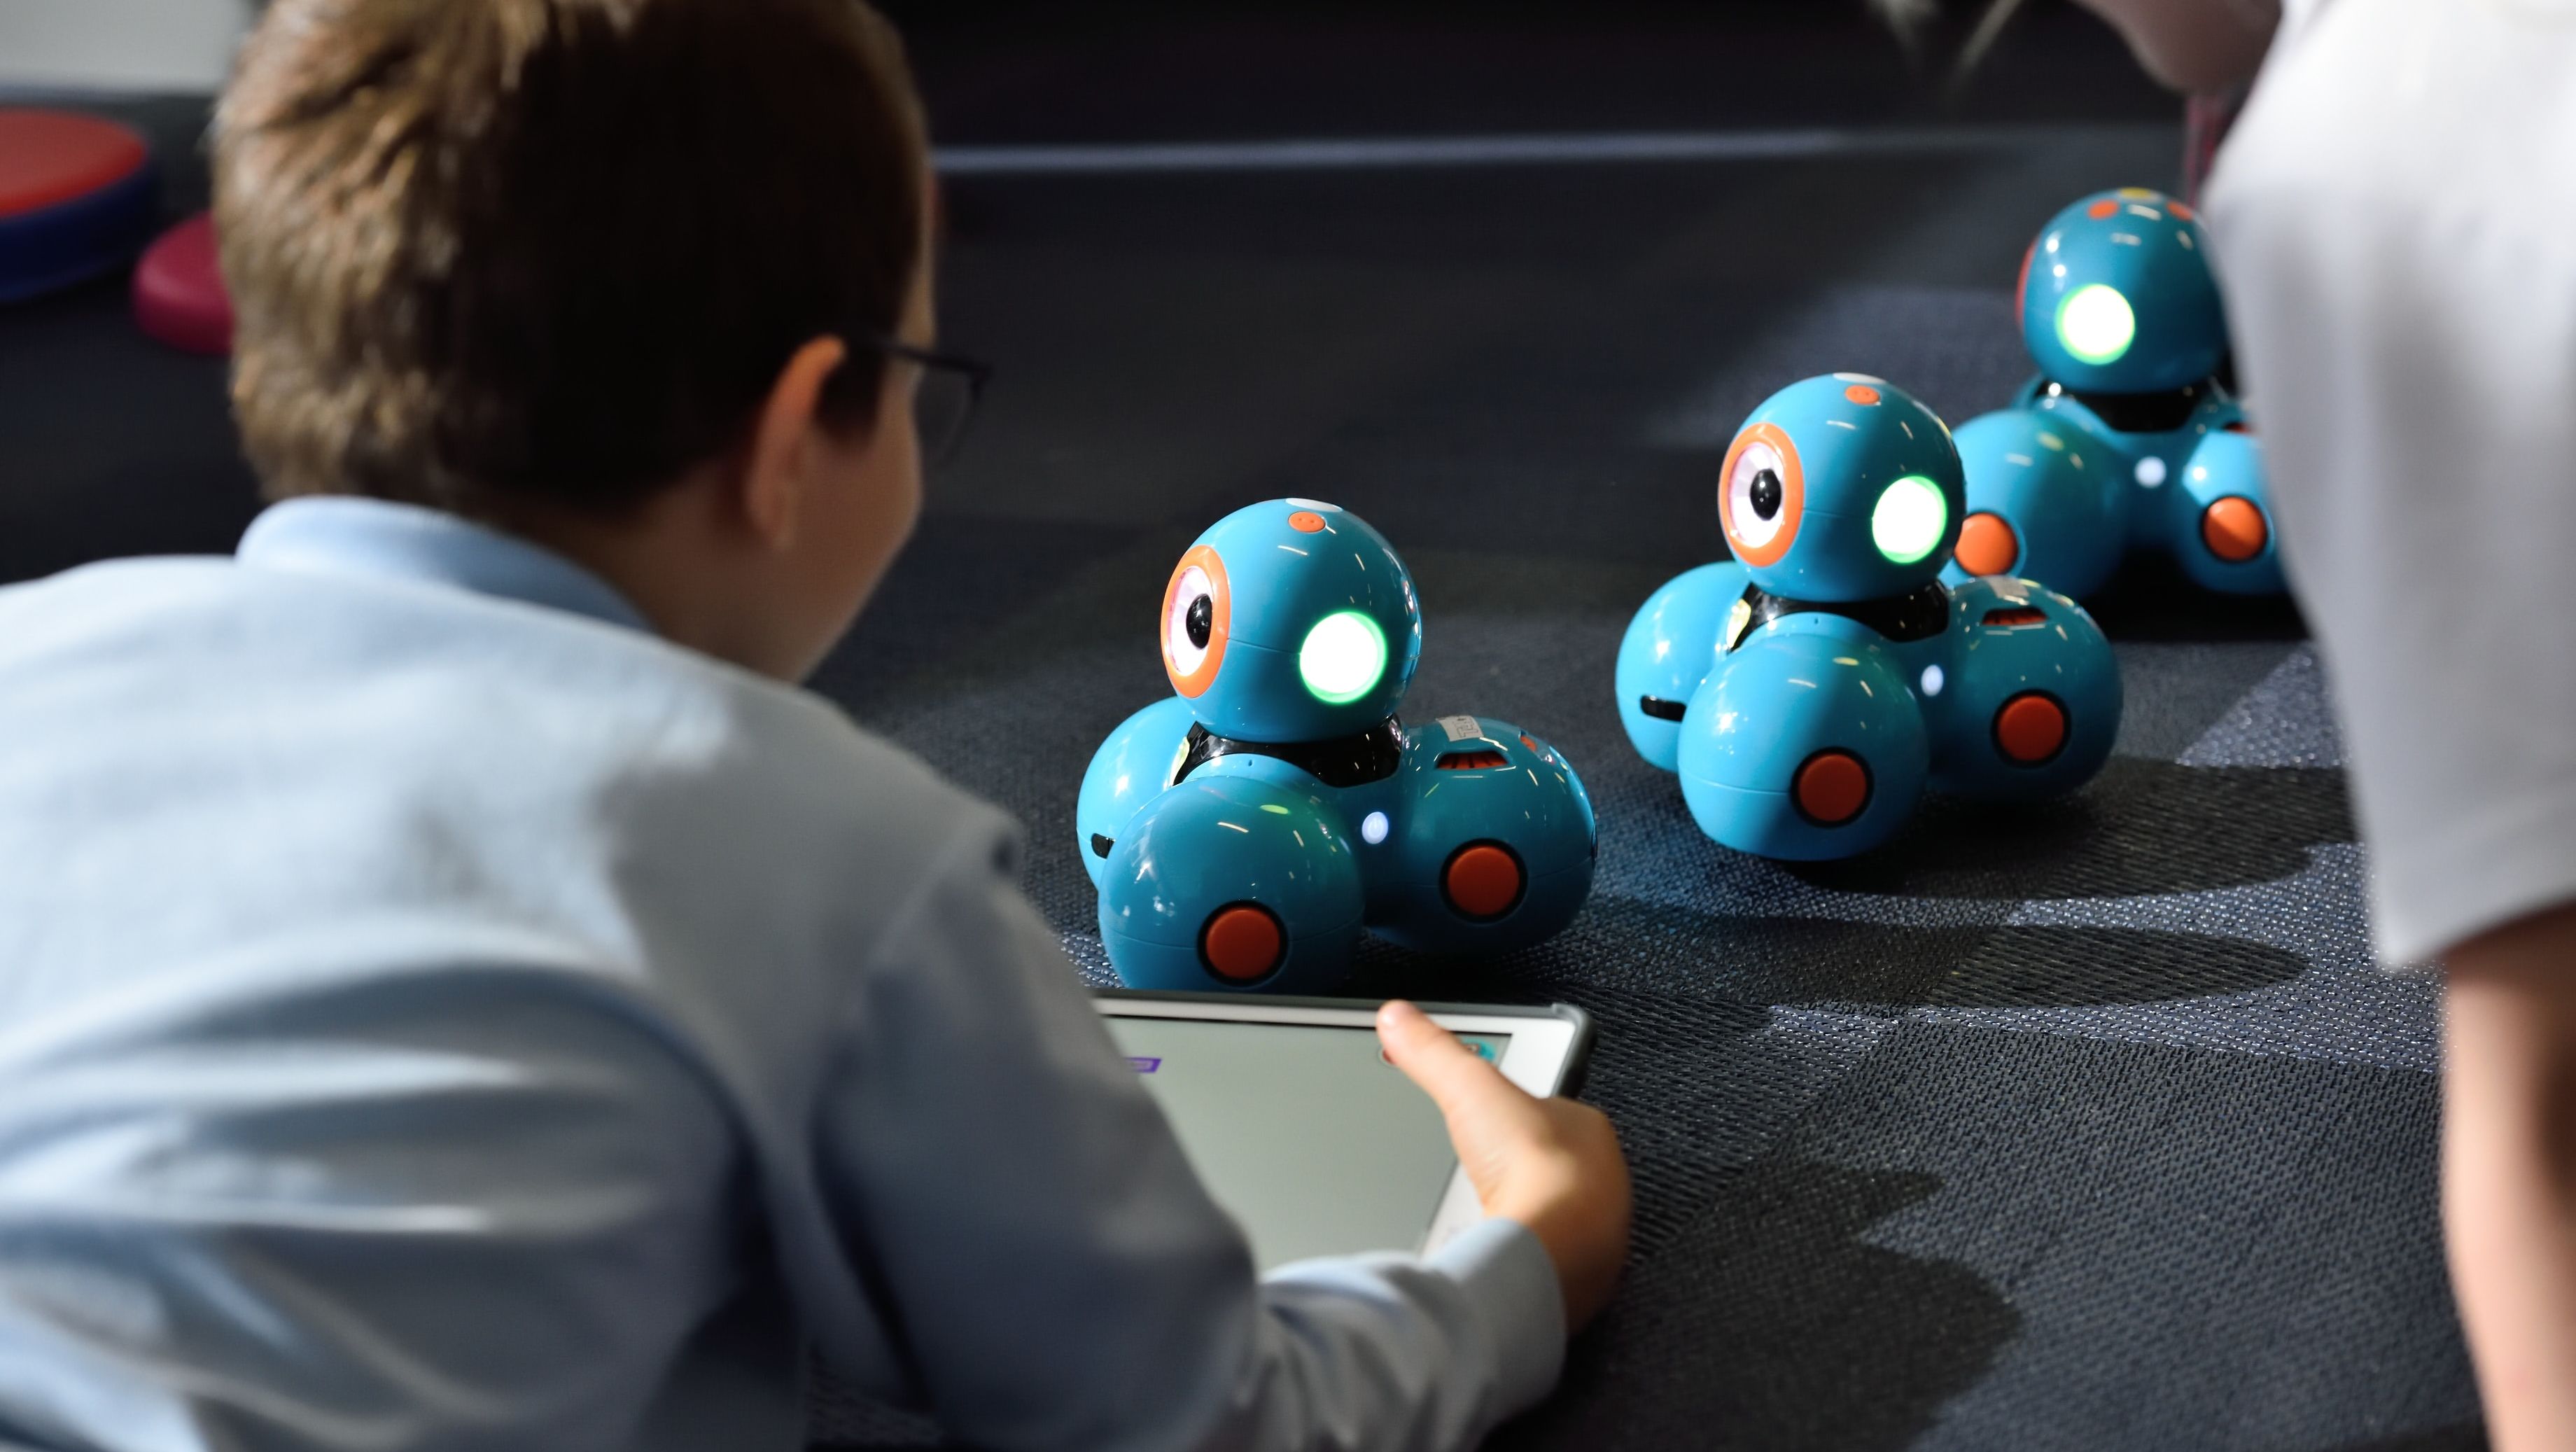 Image of a child playing with robot toys.